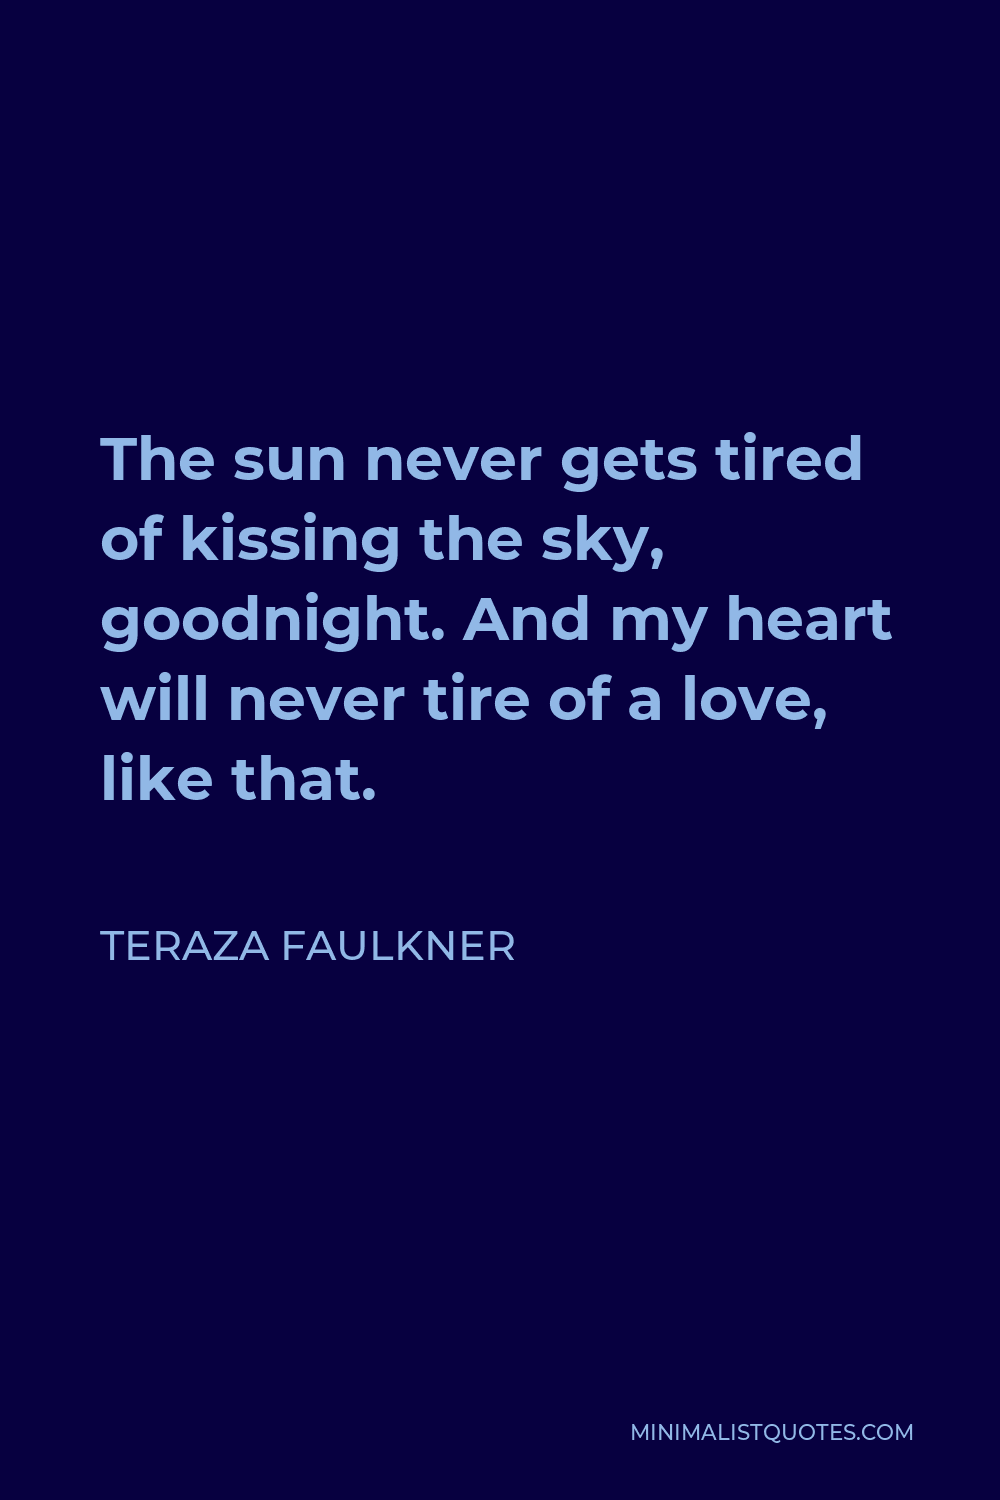 Teraza Faulkner Quote - The sun never gets tired of kissing the sky, goodnight. And my heart will never tire of a love, like that.